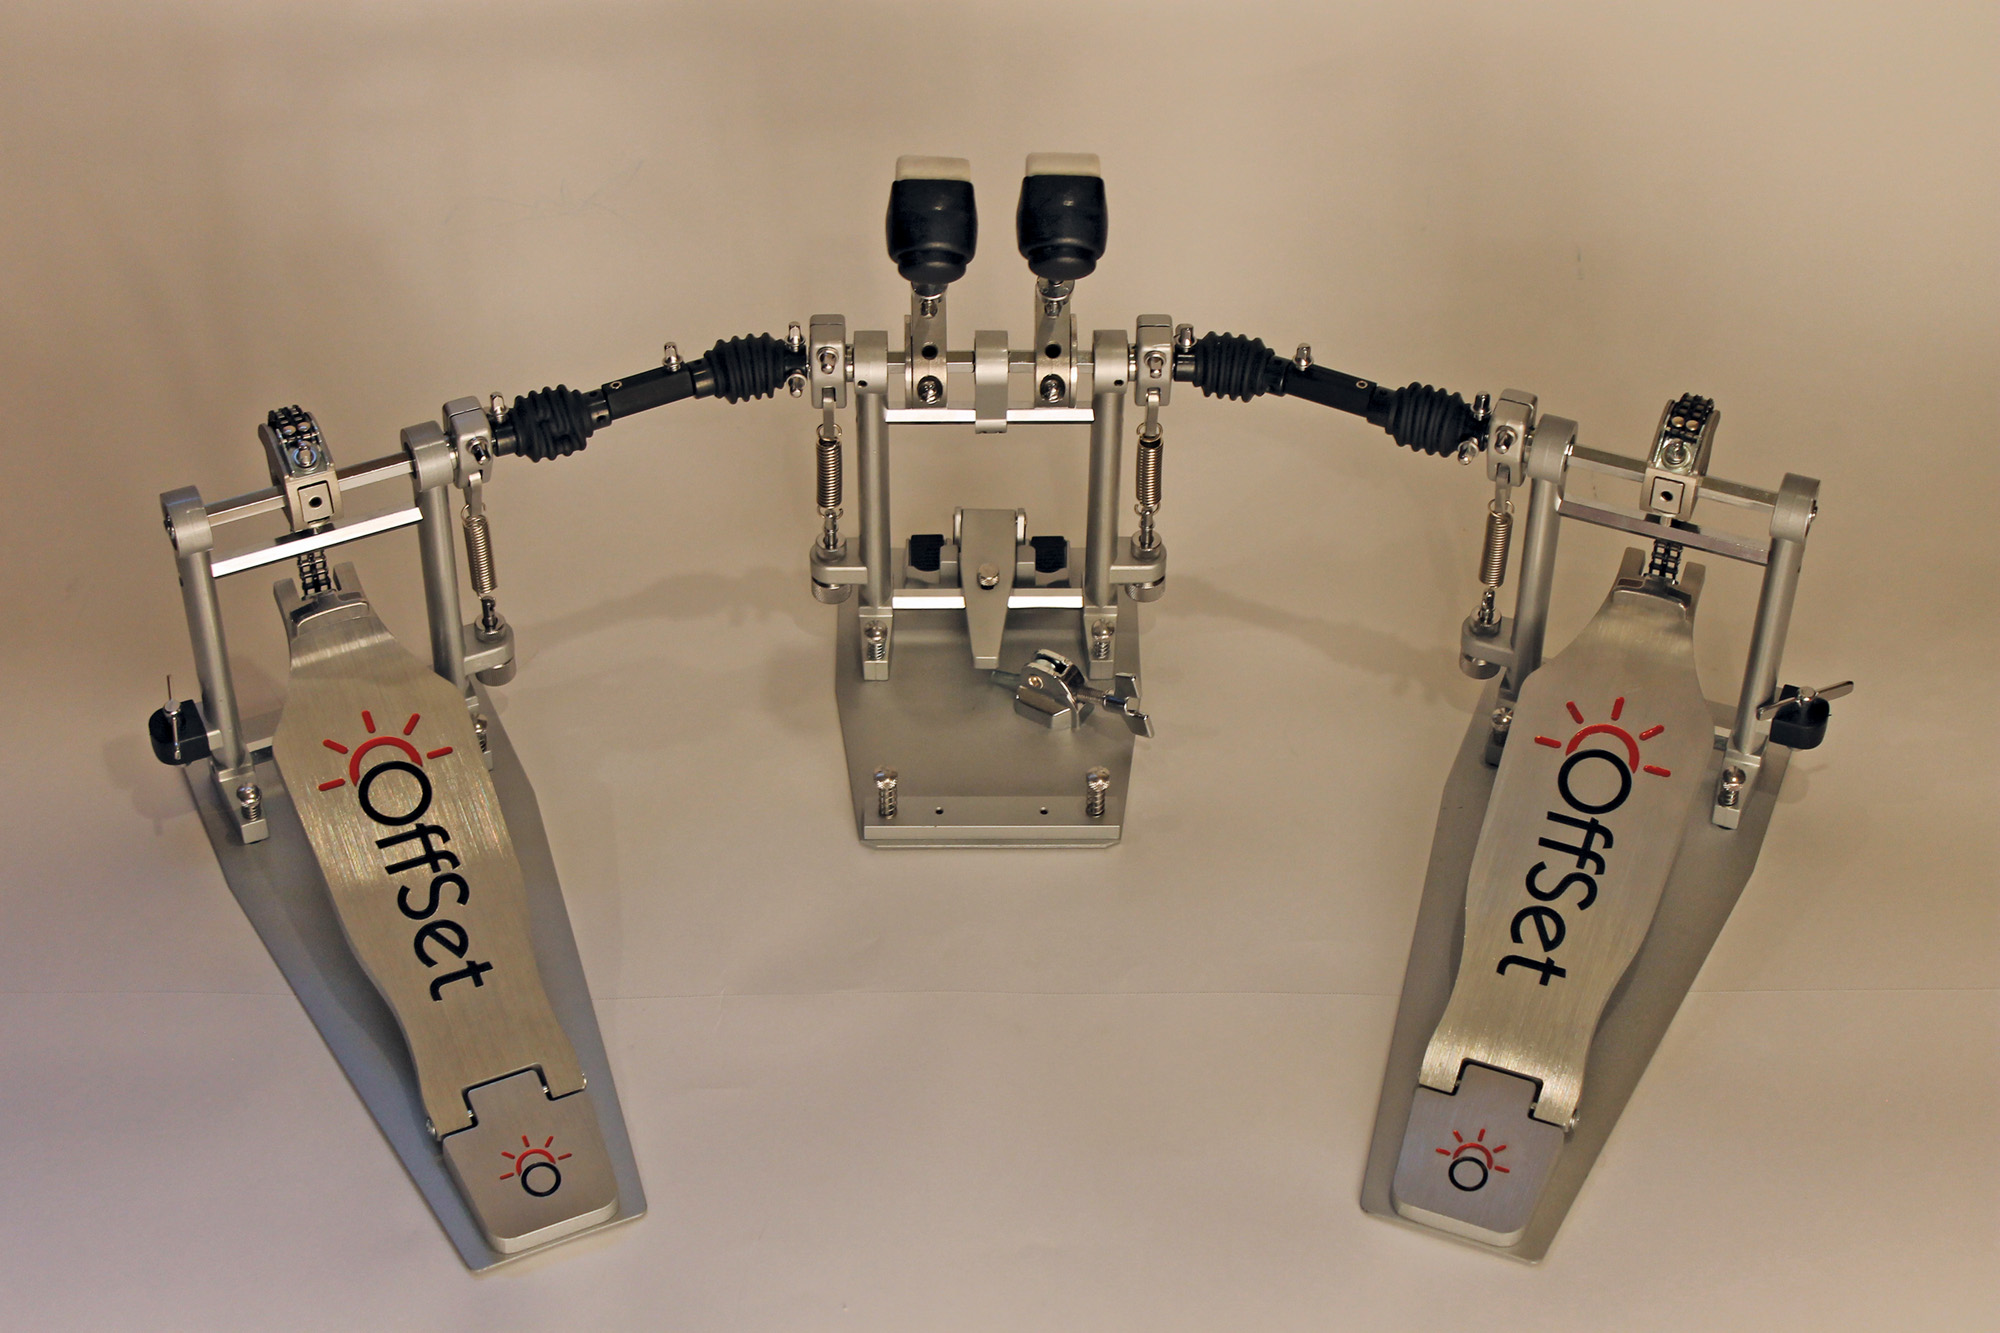 Check Out Customer Reviews on OffSet Bass Drum Pedal